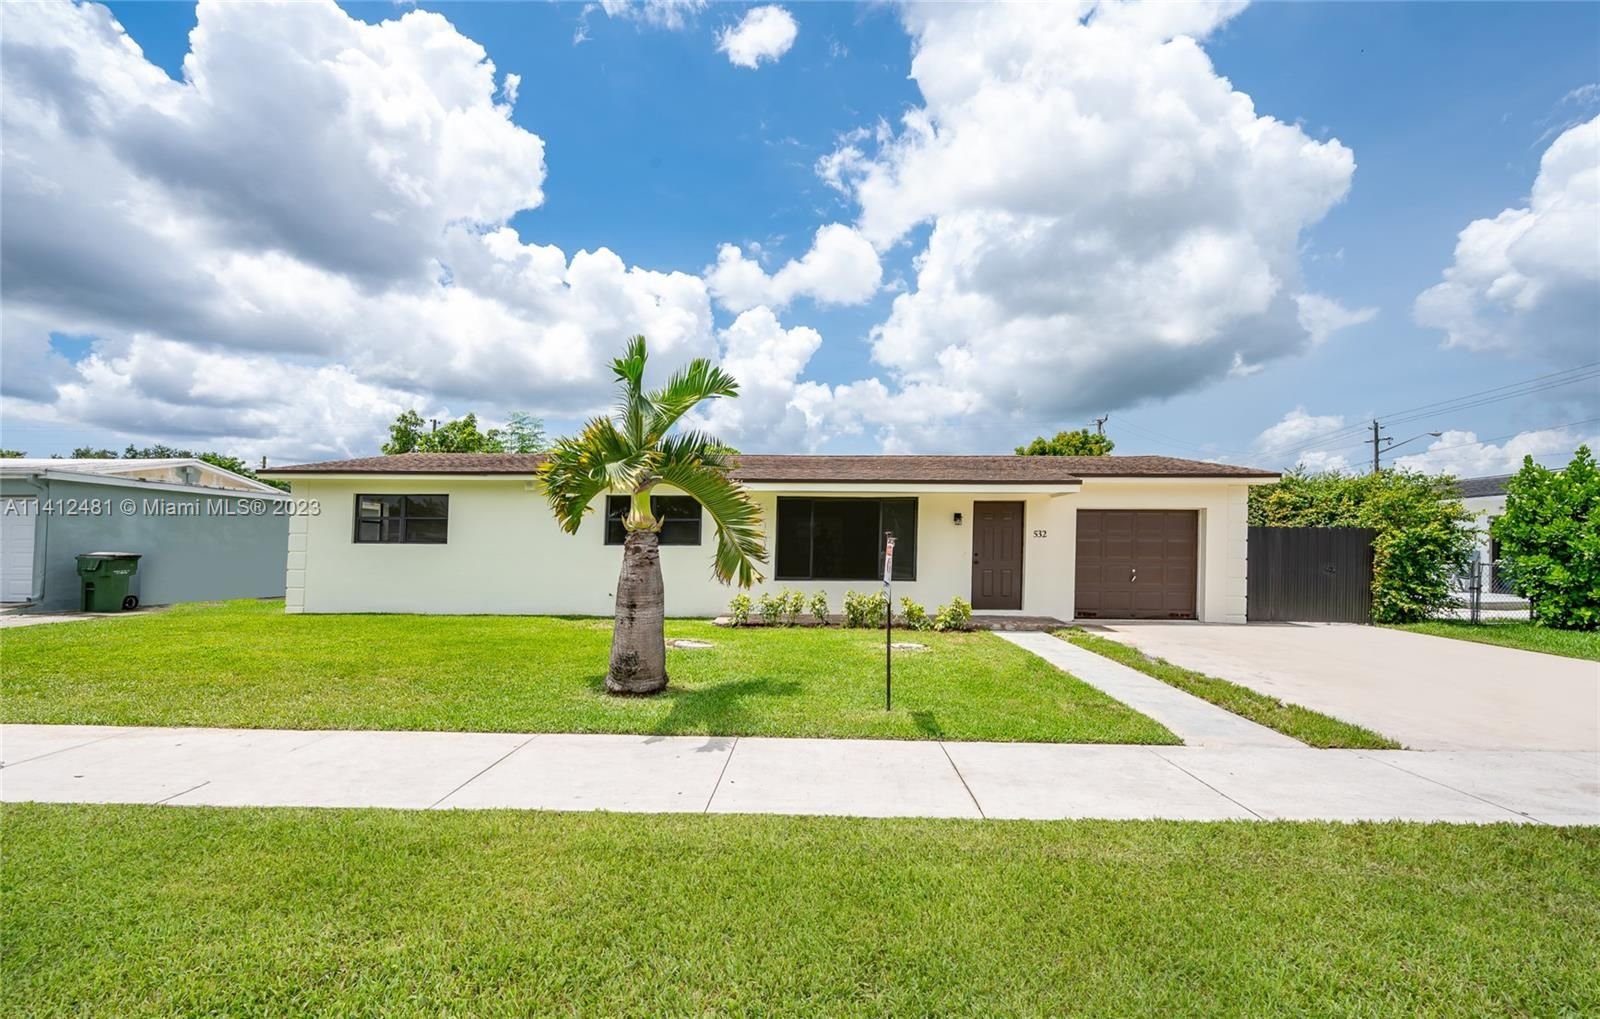 Real estate property located at 532 15th St, Miami-Dade County, Homestead, FL